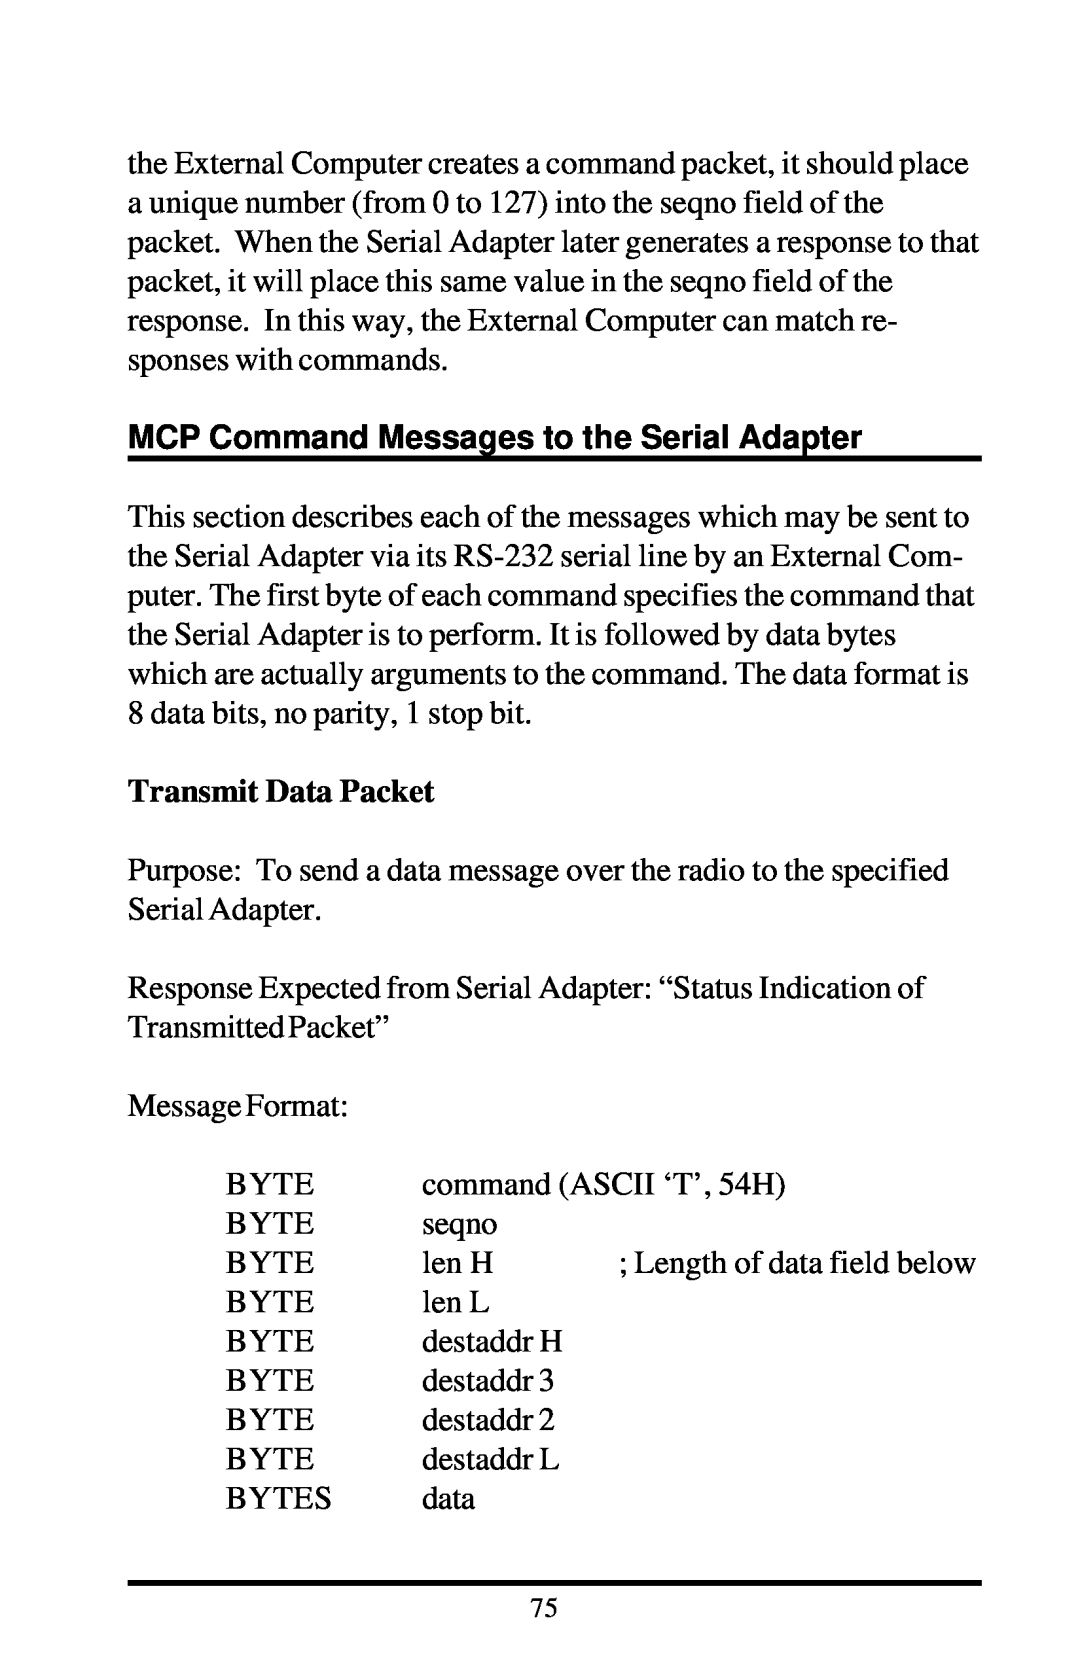 Proxima ASA 7911, 7910 manual MCP Command Messages to the Serial Adapter, Transmit Data Packet 